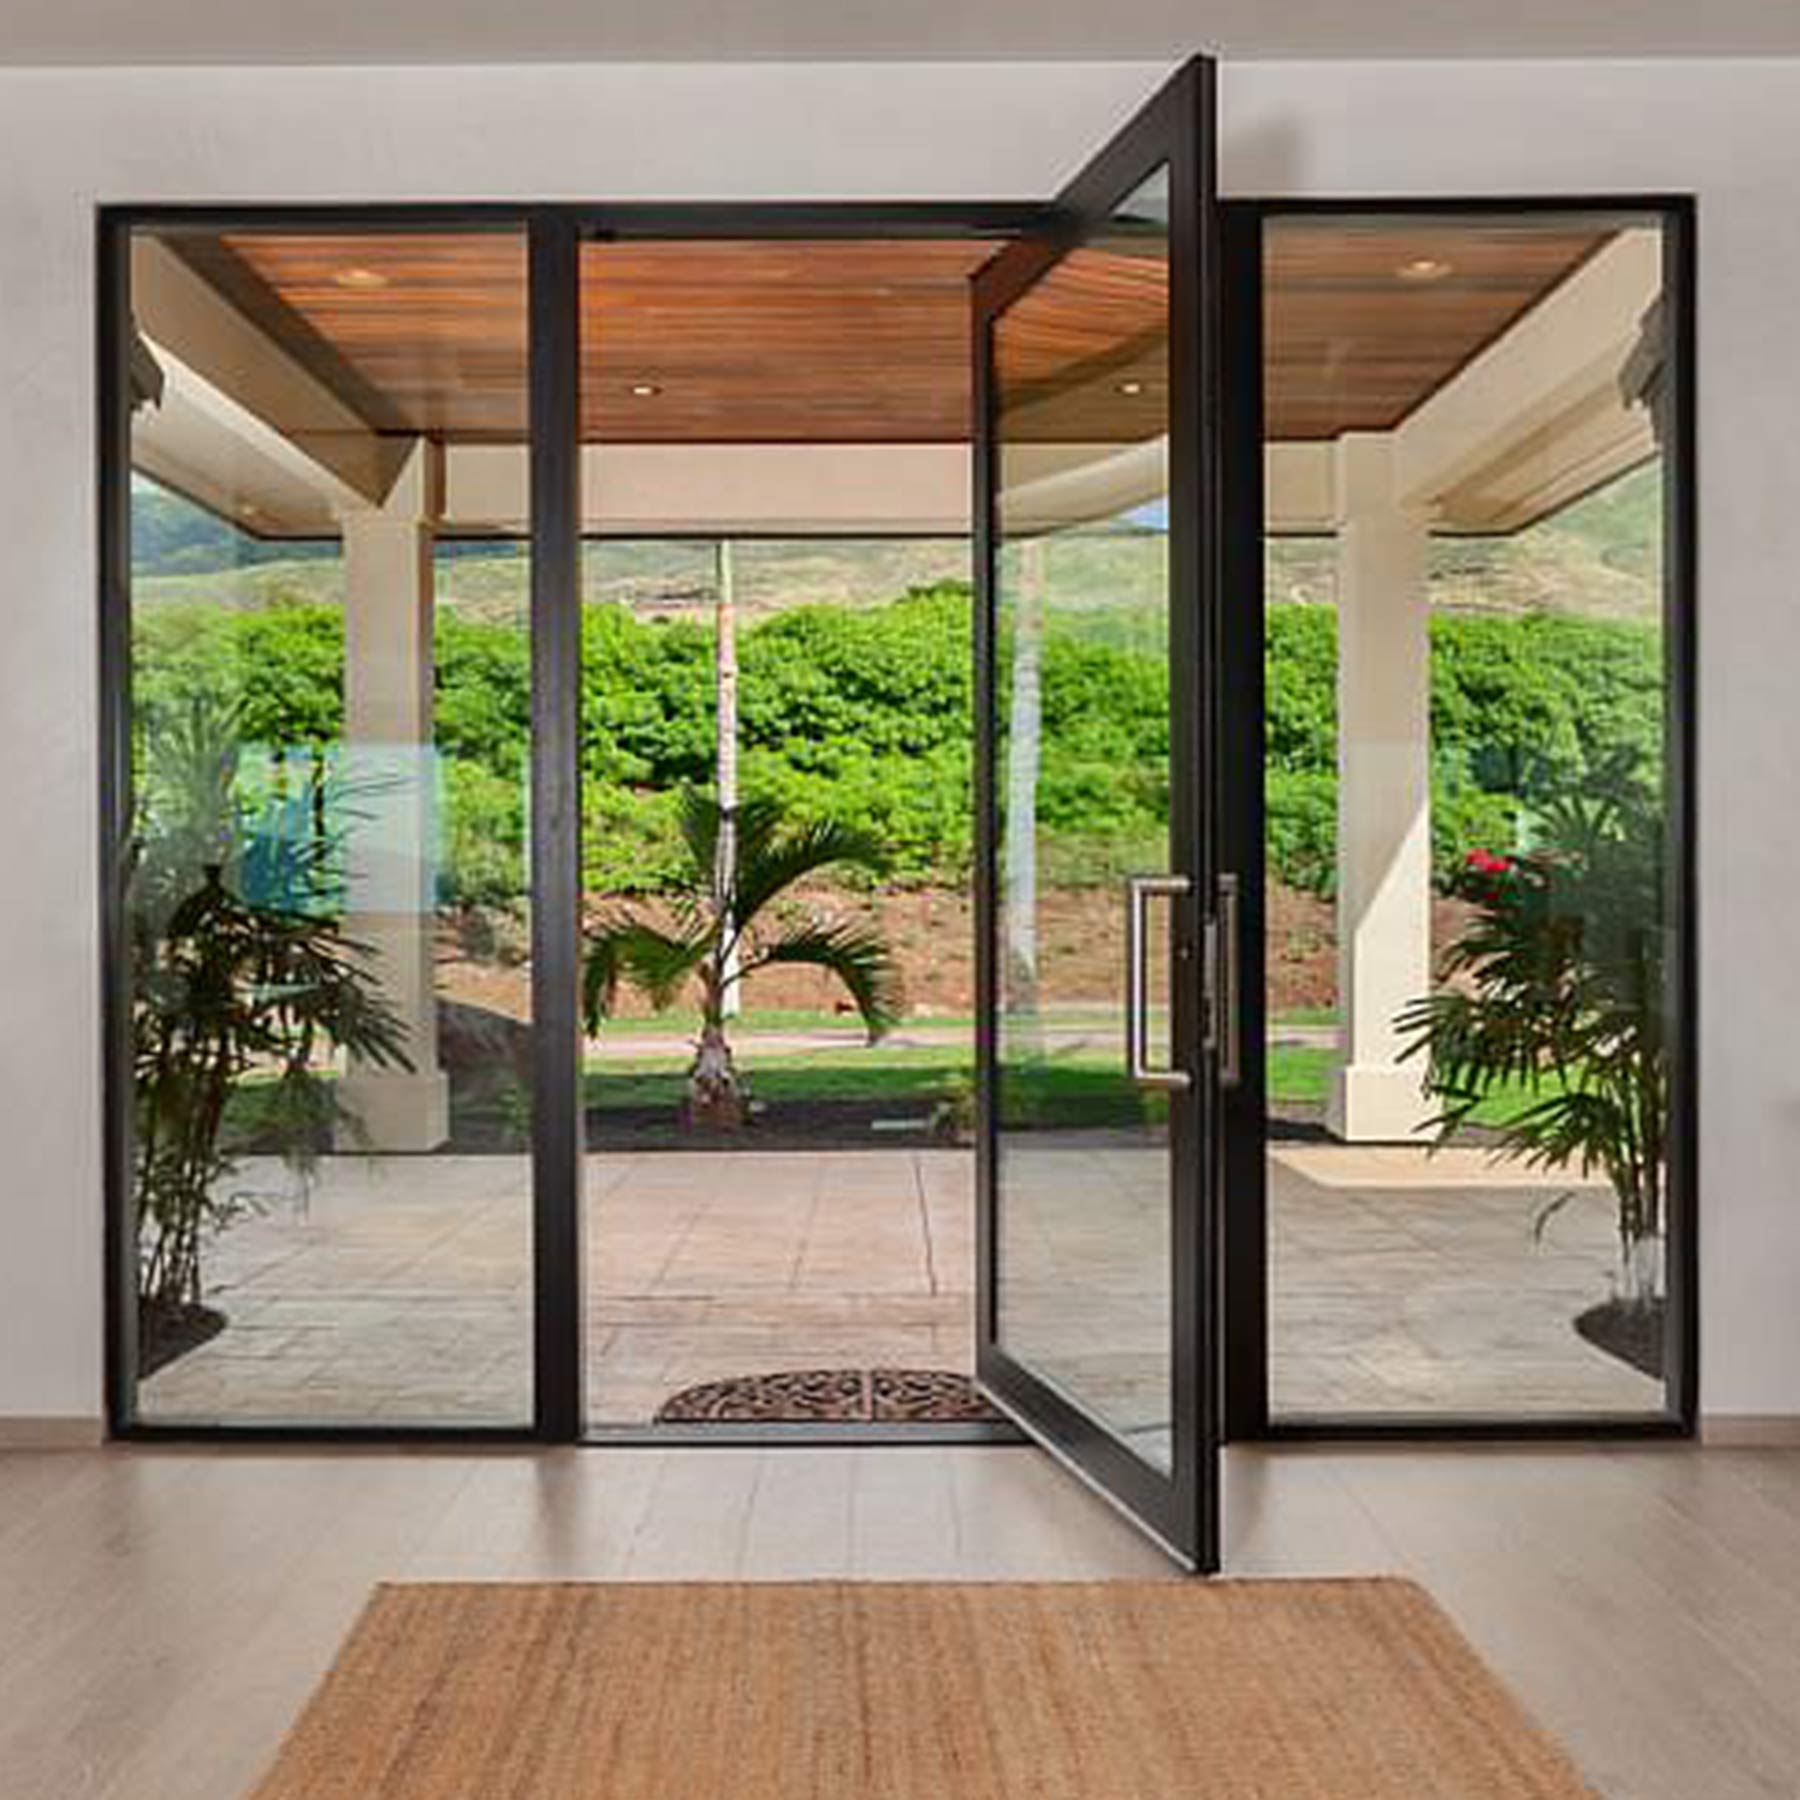 gloryirondoors thermal break simple design iron frame glass pivot door with two sidelights